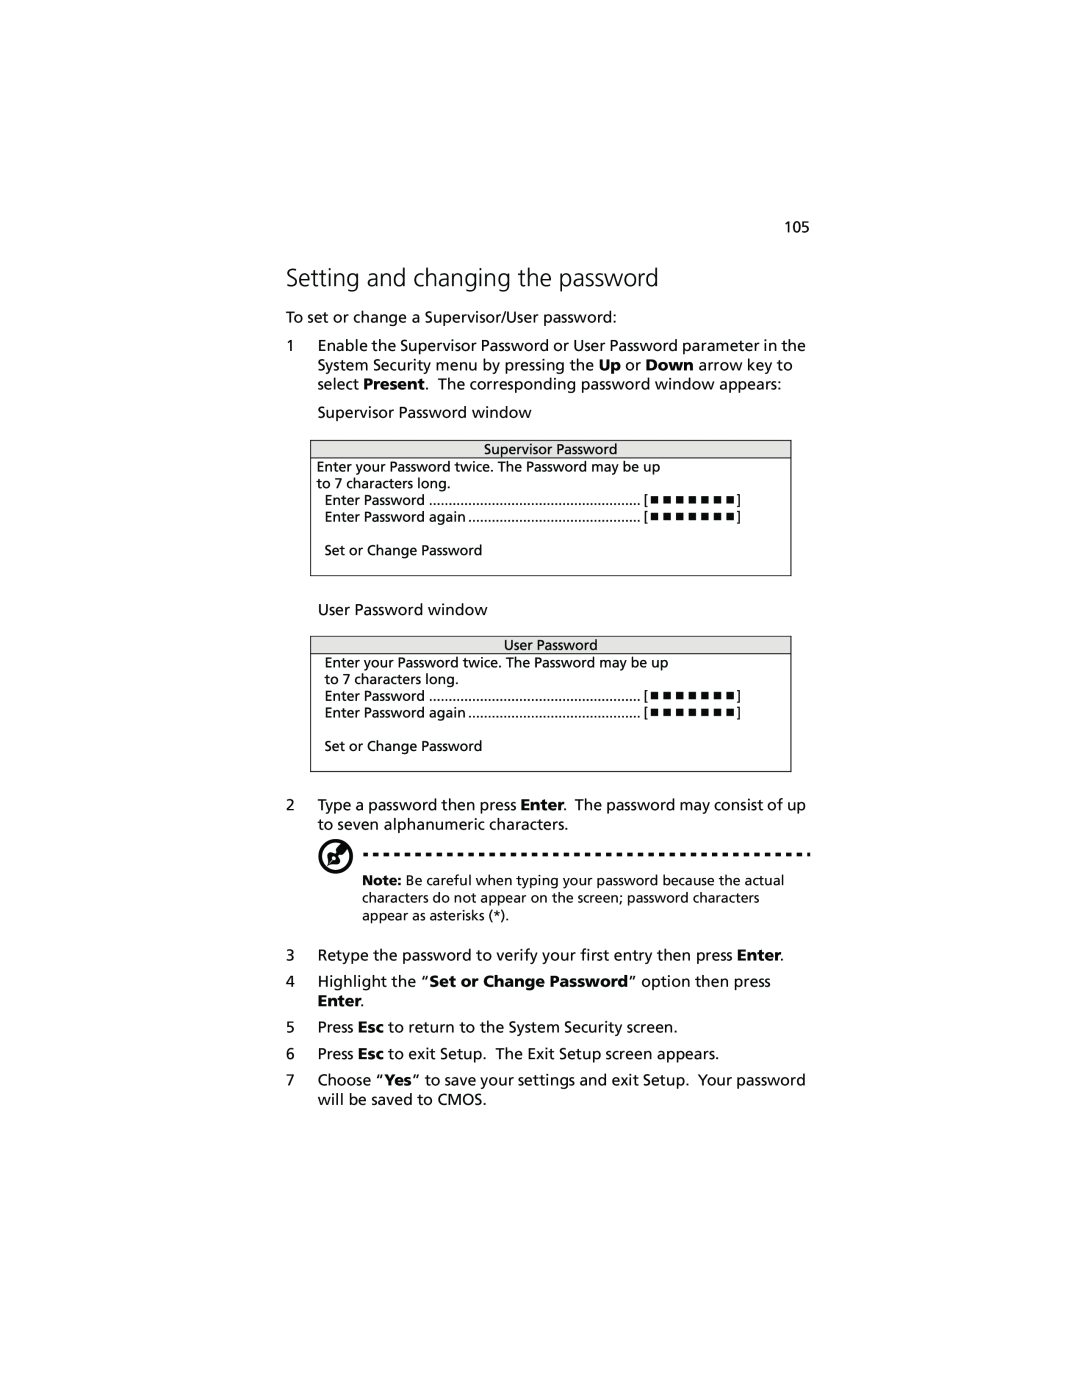 Acer Altos G610 manual Setting and changing the password 